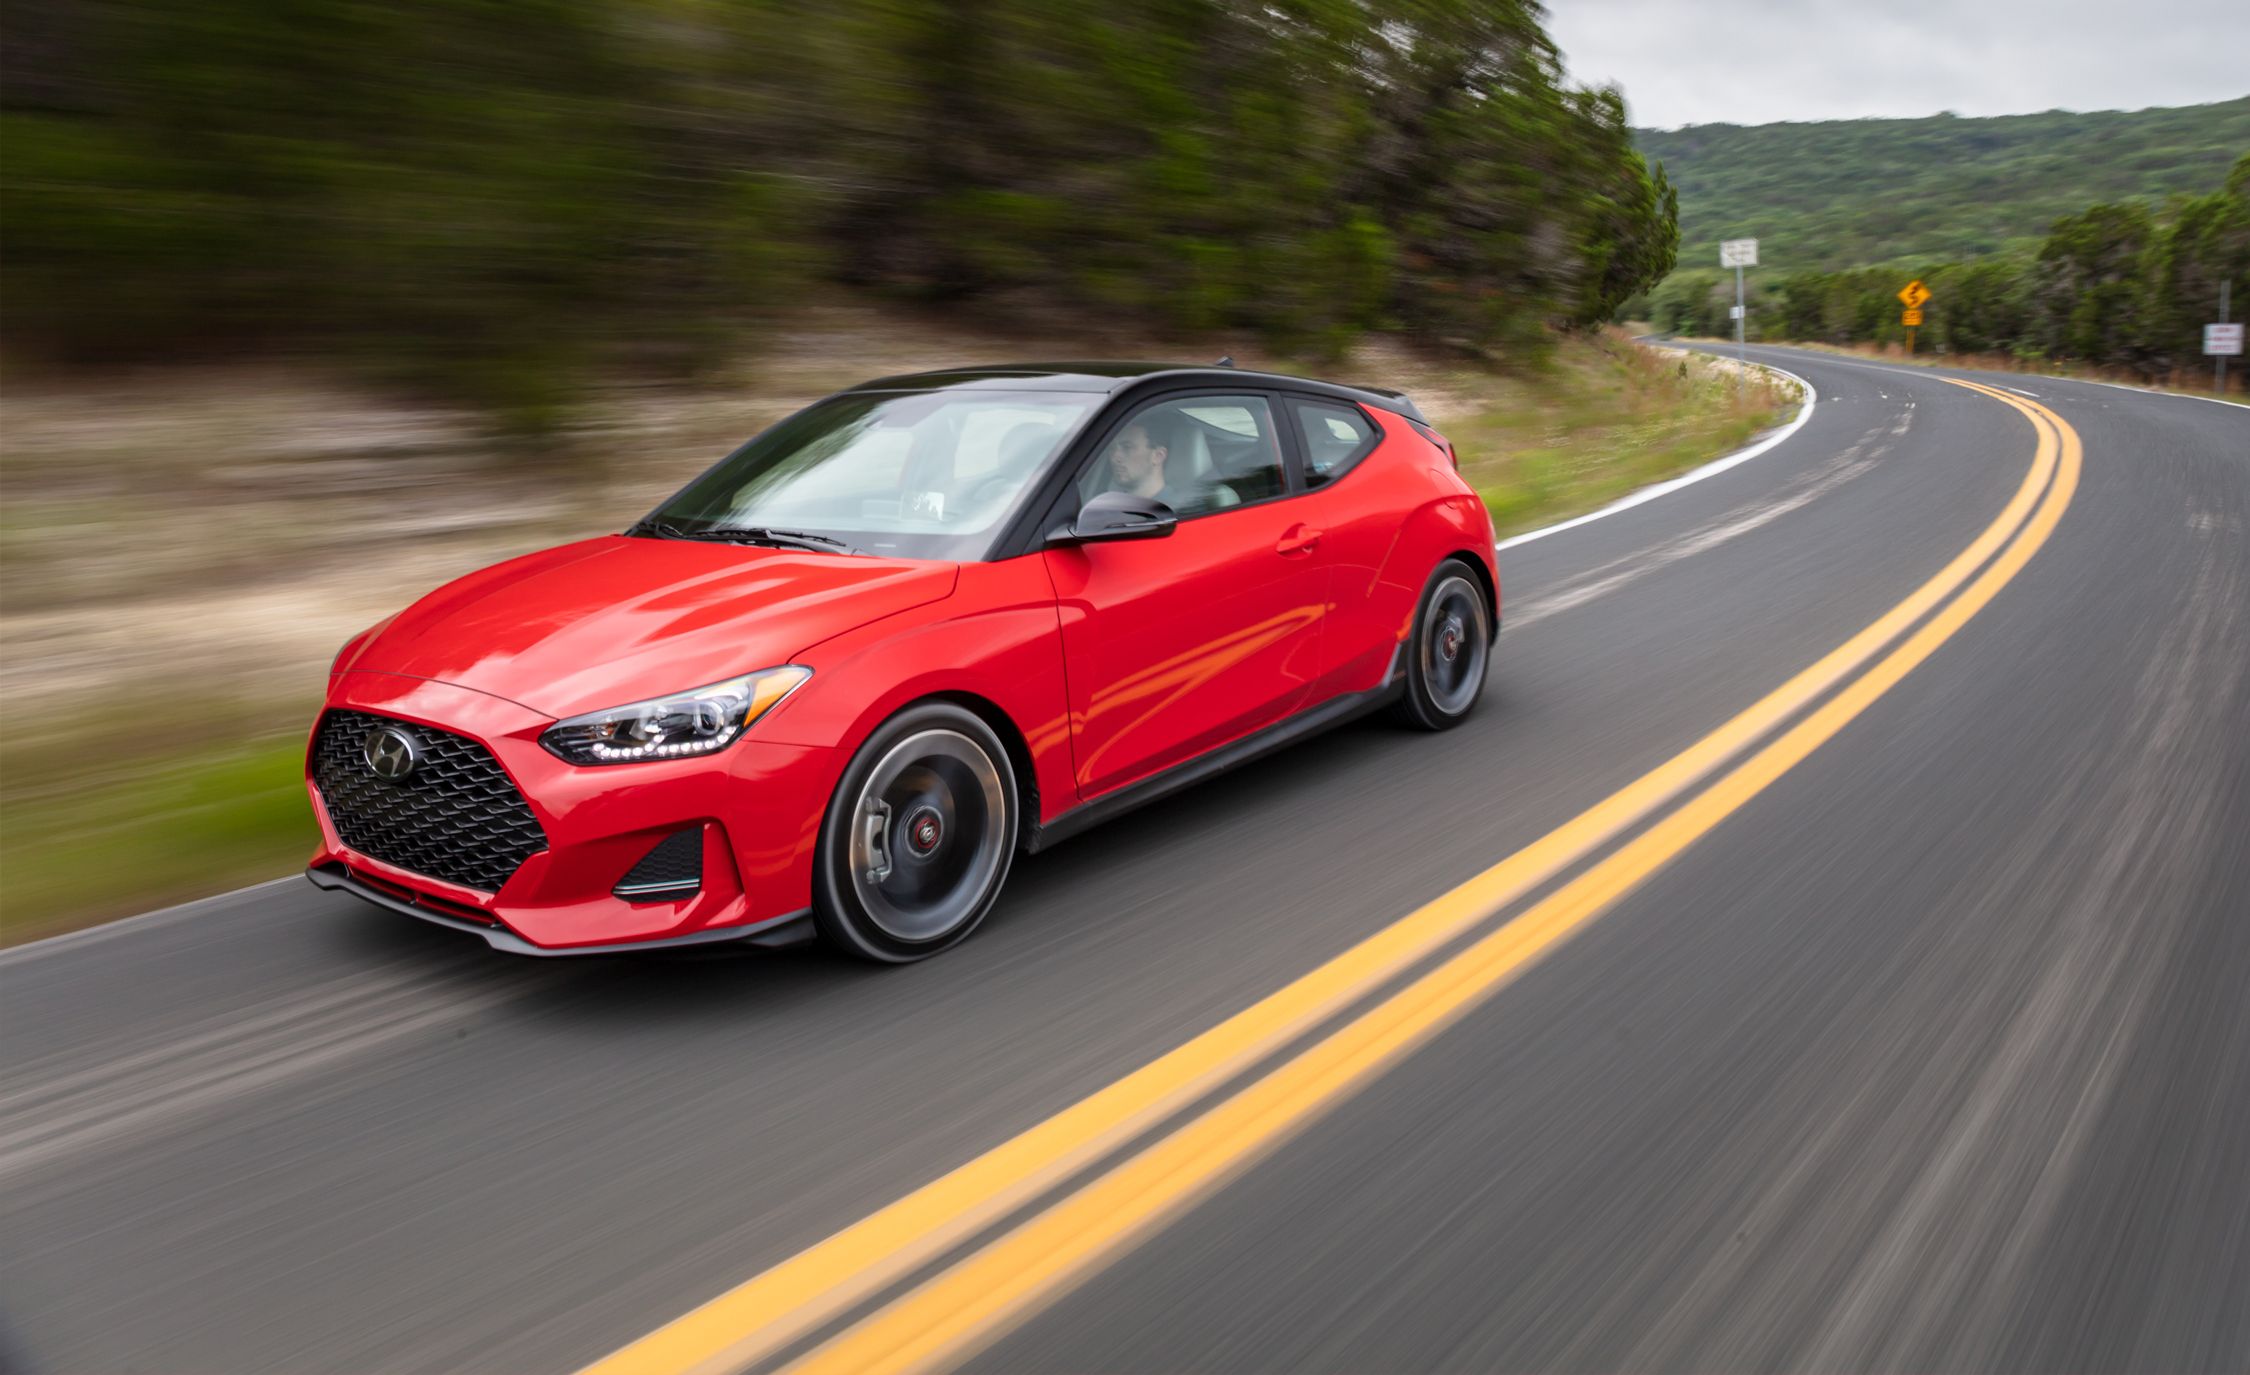 First Drive: 2019 Hyundai Veloster / Veloster Turbo